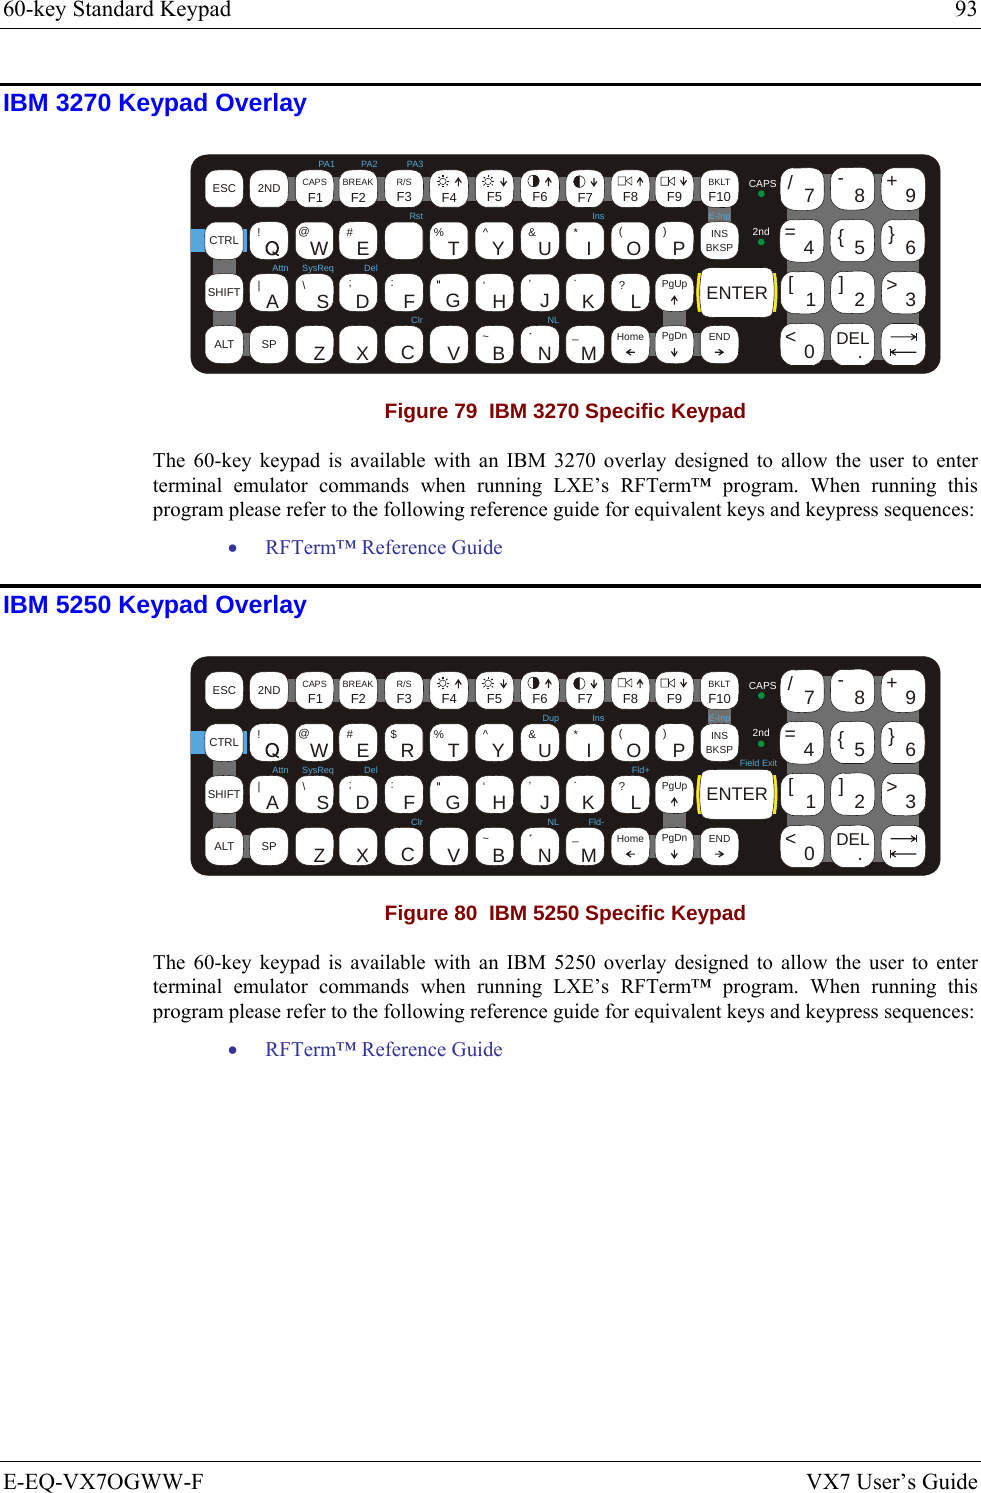 60-key Standard Keypad  93 E-EQ-VX7OGWW-F  VX7 User’s Guide IBM 3270 Keypad Overlay  ESCSHIFT2NDALT SPF1 F2 F3 F4 F5 F6 F7 F8 F9CAPS BREAK R/SBCMNADFGHJKLSVXZ@#$% ^&amp;*()F10BKLTINSBKSPEIOPRTUWYCTRL !|\ :; ‘,.?~_Home ENDENTERPgUpPgDn0.1245/78-+={}[]&gt;&lt;DEL369Attn SysReq DelClr NLIns E-InpCAPS2ndRstPA1 PA2 PA3 Figure 79  IBM 3270 Specific Keypad The 60-key keypad is available with an IBM 3270 overlay designed to allow the user to enter terminal emulator commands when running LXE’s RFTerm™ program. When running this program please refer to the following reference guide for equivalent keys and keypress sequences: • RFTerm™ Reference Guide IBM 5250 Keypad Overlay  ESCSHIFT2NDALT SPF1 F2 F3 F4 F5 F6 F7 F8 F9CAPS BREAK R/SBCMNADFGHJKLSVXZ@#$% ^&amp;*()F10BKLTINSBKSPEIOPRTUWYCTRL !|\ :; ‘,.?~_Home ENDENTERPgUpPgDn0.1245/78-+={}[]&gt;&lt;DEL369Attn SysReq DelClrDupNLInsFld+Fld-E-InpField ExitCAPS2nd Figure 80  IBM 5250 Specific Keypad The 60-key keypad is available with an IBM 5250 overlay designed to allow the user to enter terminal emulator commands when running LXE’s RFTerm™ program. When running this program please refer to the following reference guide for equivalent keys and keypress sequences: • RFTerm™ Reference Guide 